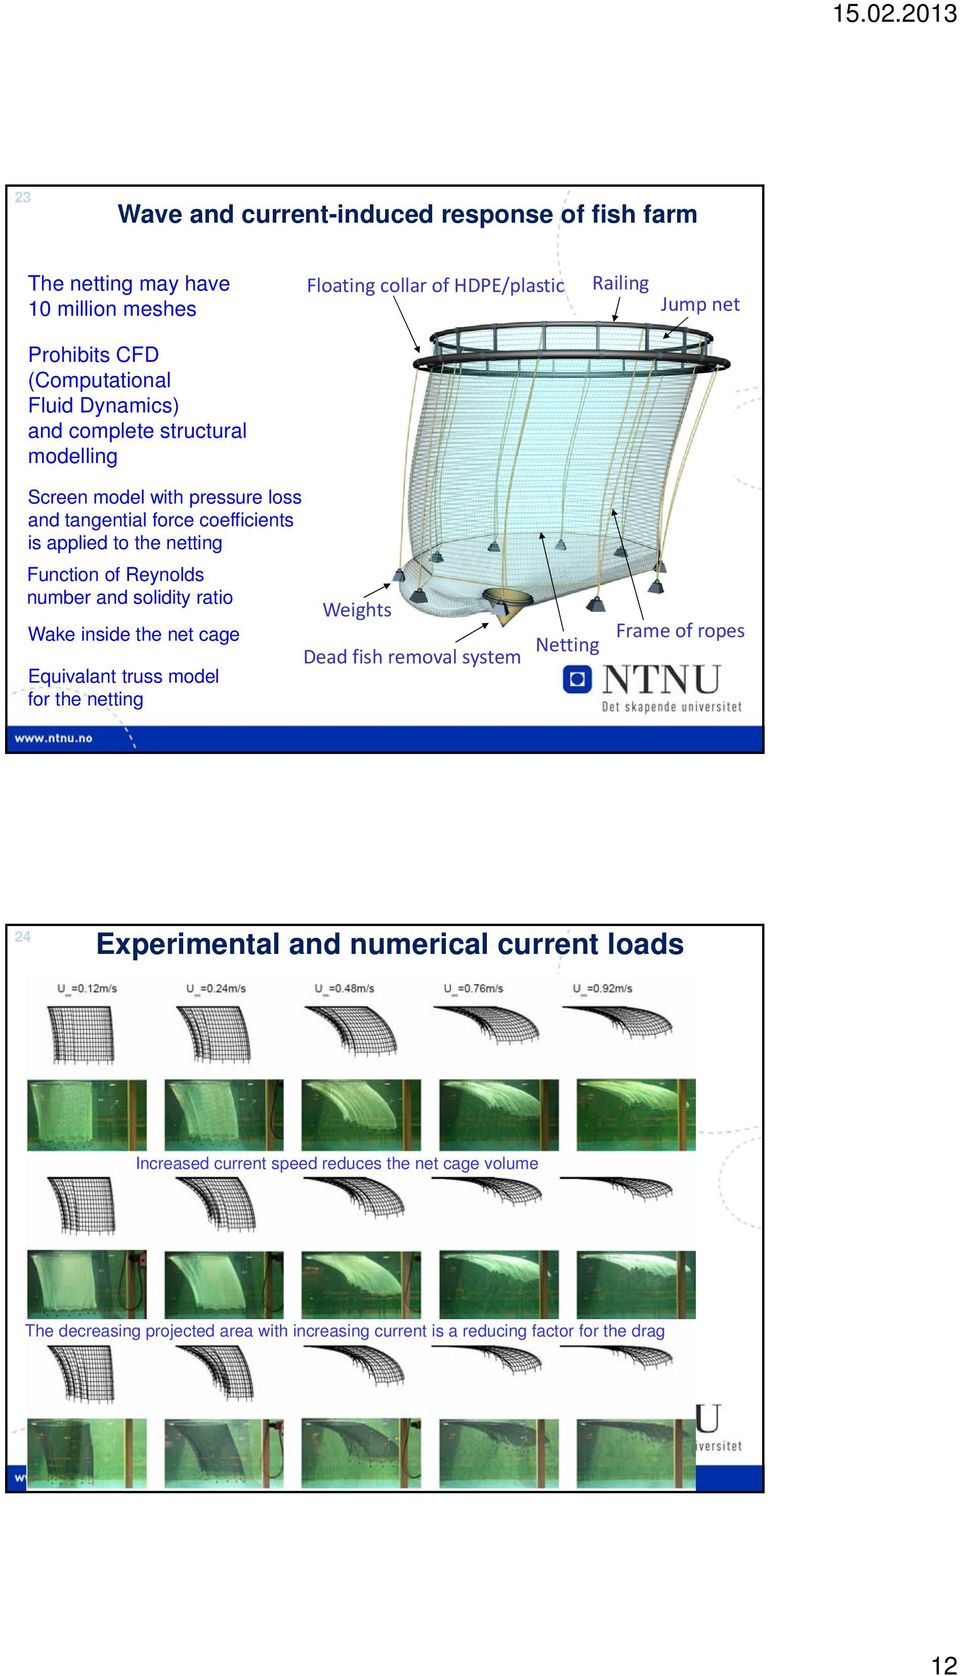 of Reynolds number and solidity ratio Wake inside the net cage Equivalant truss model for the netting Weights Dead fish removal system Netting Frame of ropes 24